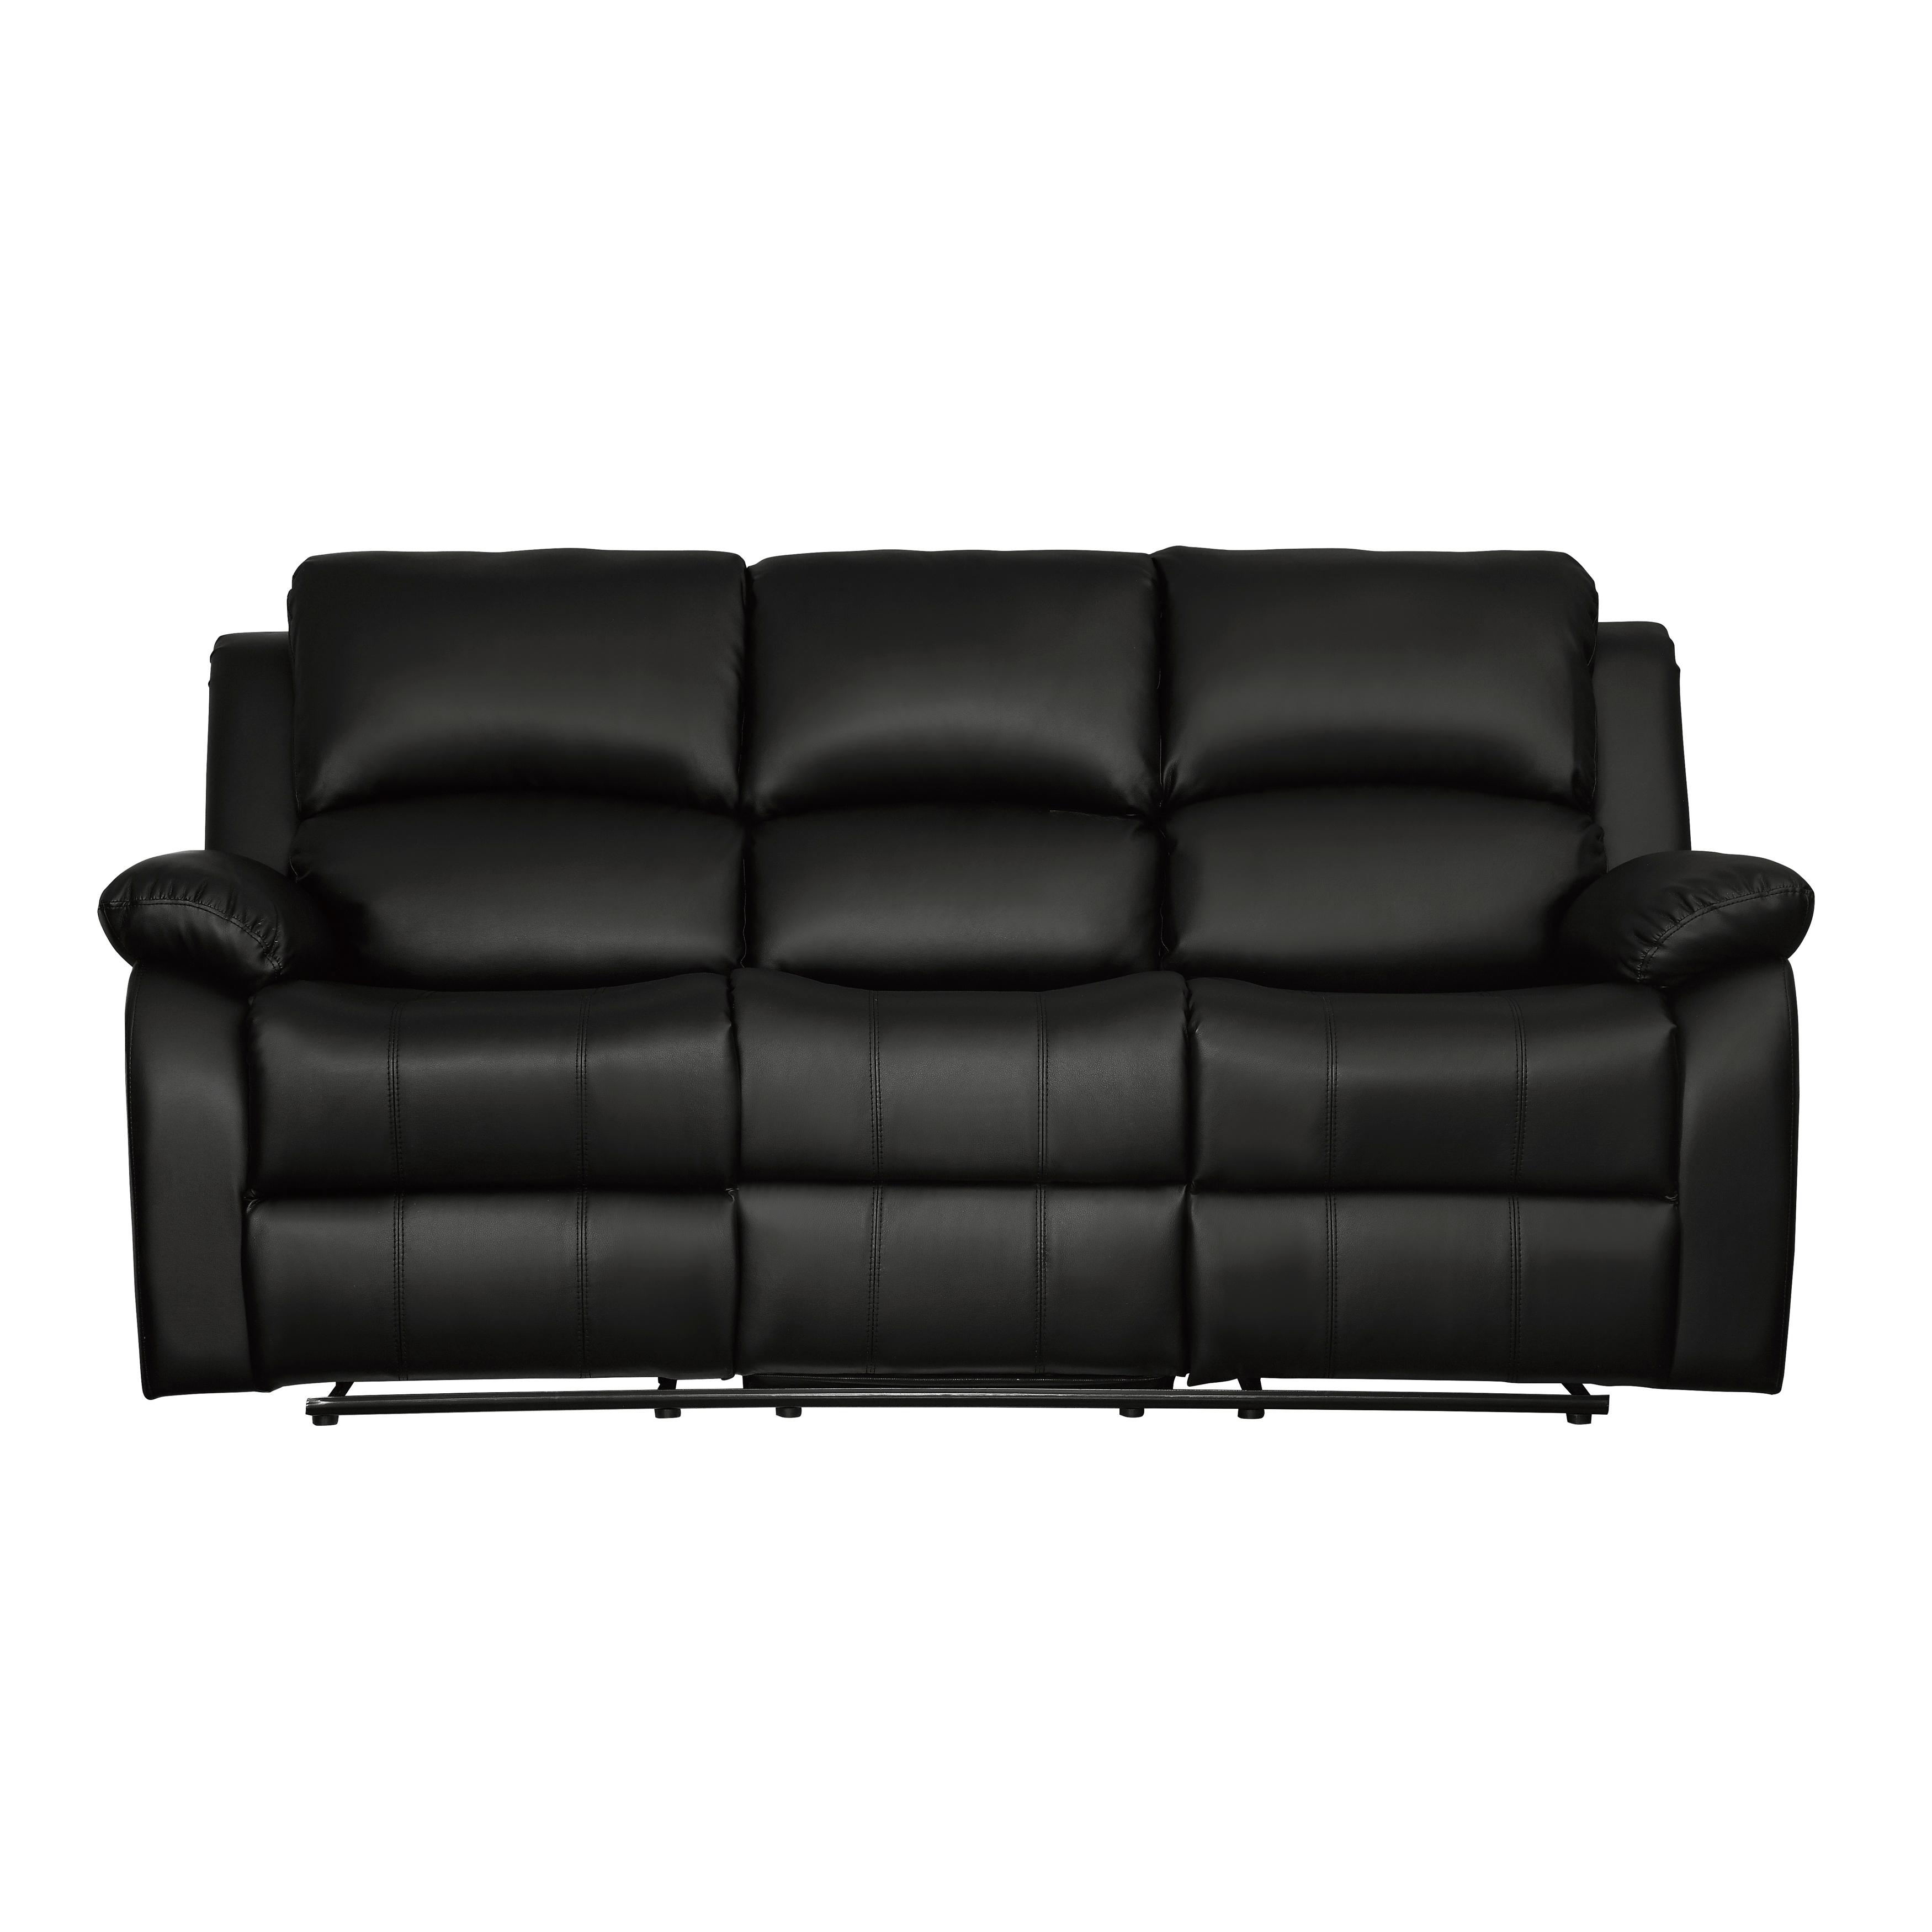 

    
Transitional Black Faux Leather Reclining Sofa Homelegance 9928BLK-3 Clarkdale
